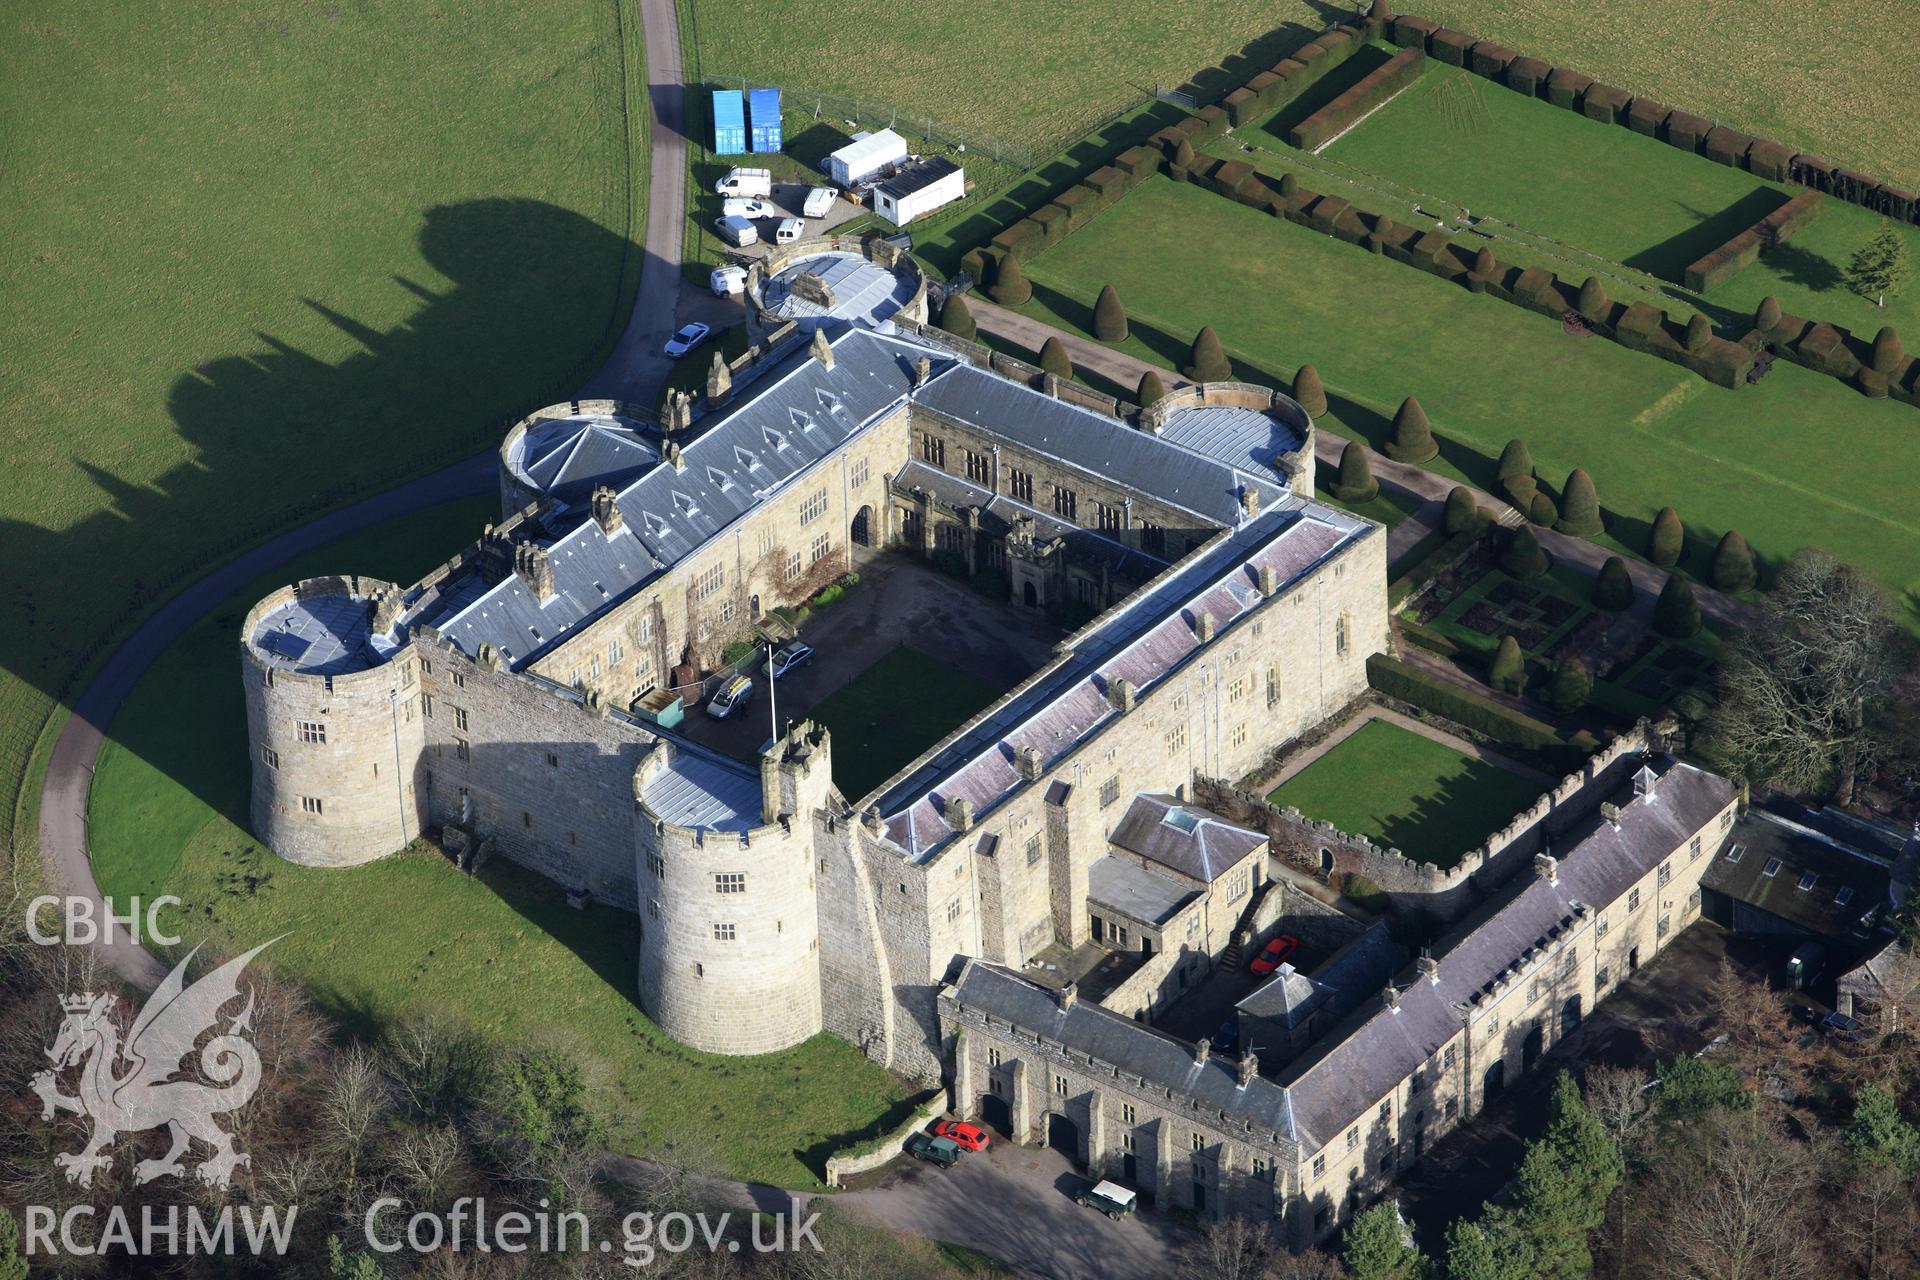 RCAHMW colour oblique photograph of Chirk Castle. Taken by Toby Driver on 08/02/2011.